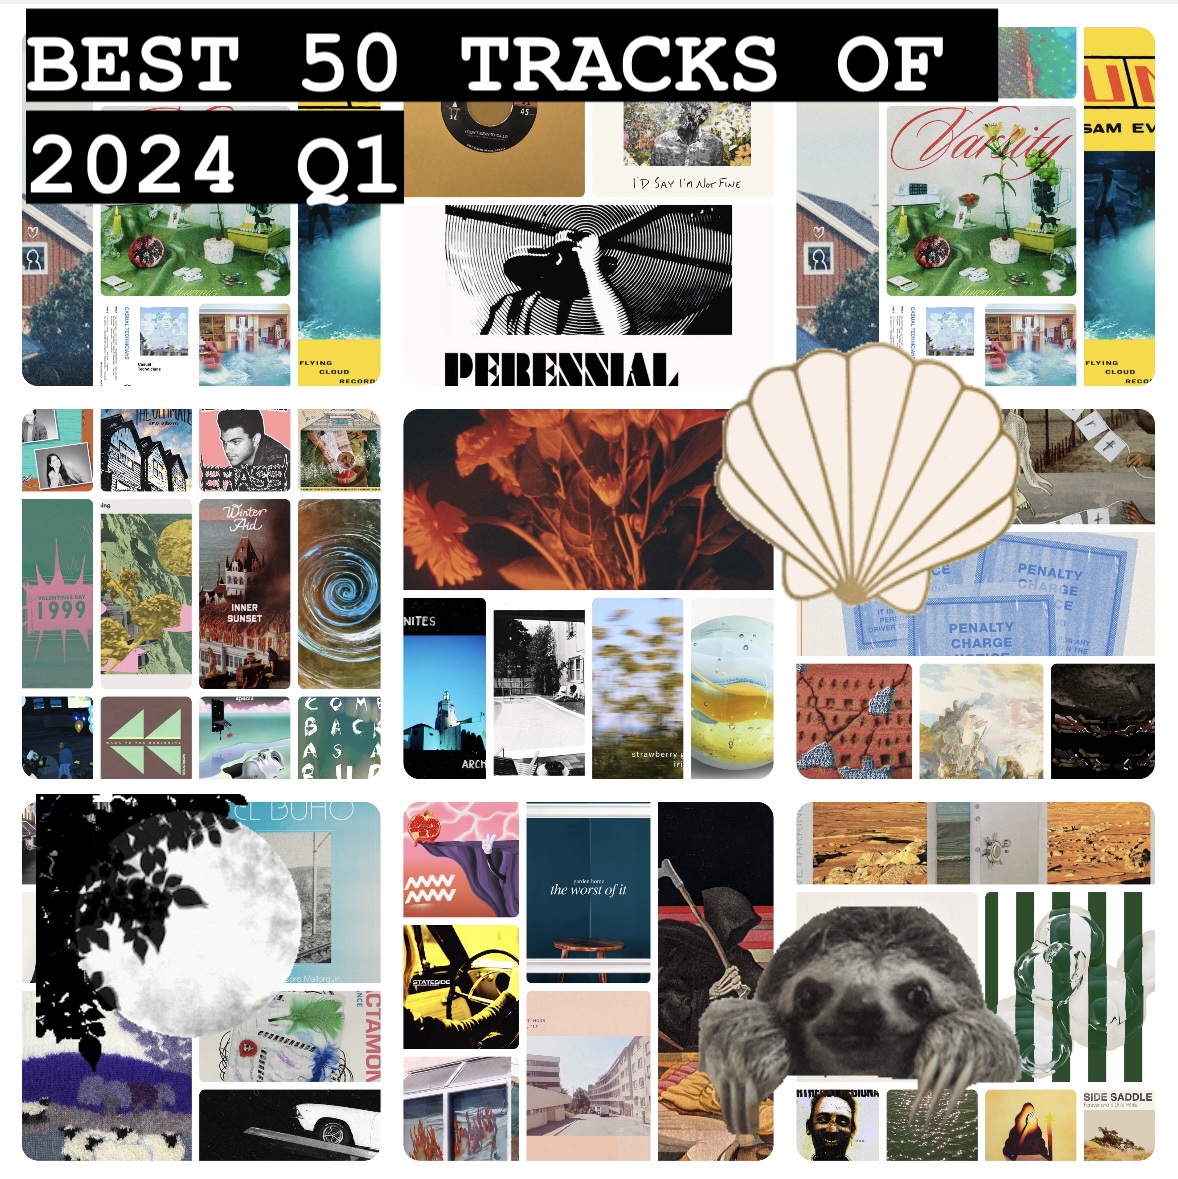 and now for our report on the BEST 50 TRACKS OF 2024 Q1 go to our site for our picks AND playlists⬇️ smallalbums.com/best-50-tracks